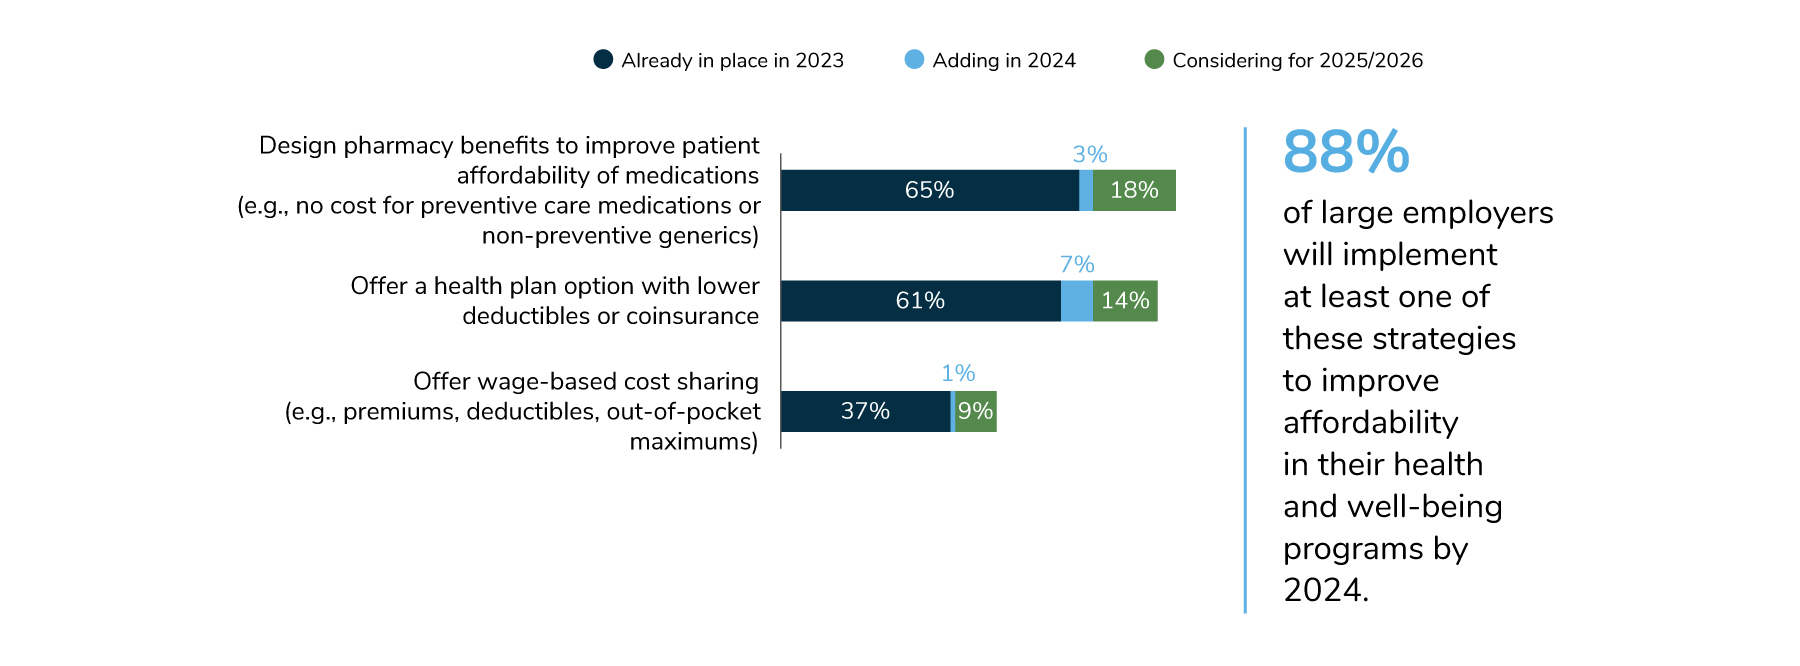 In 2024, 68% of employers will have designed pharmacy benefits to improve patient affordability of medications. 68% will offer a health plan option with lower deductibles or coinsurance. 38% will offer wage-based cost sharing.